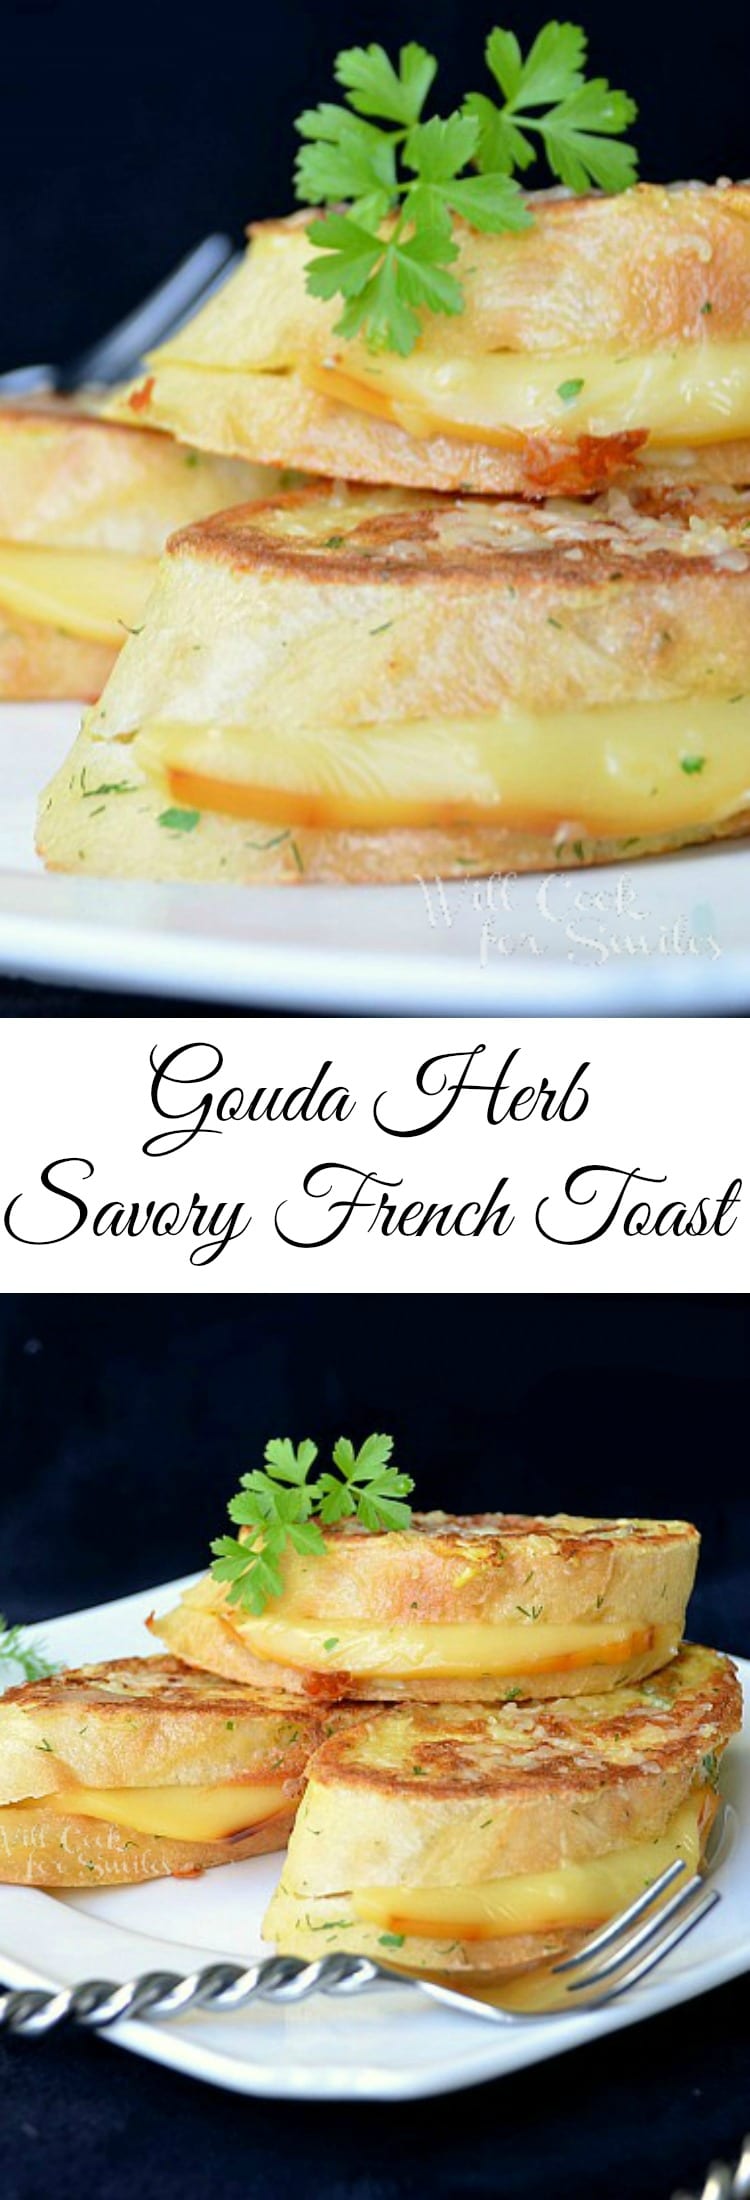 Gouda Herb Savory French Toast stacked on a plate collage